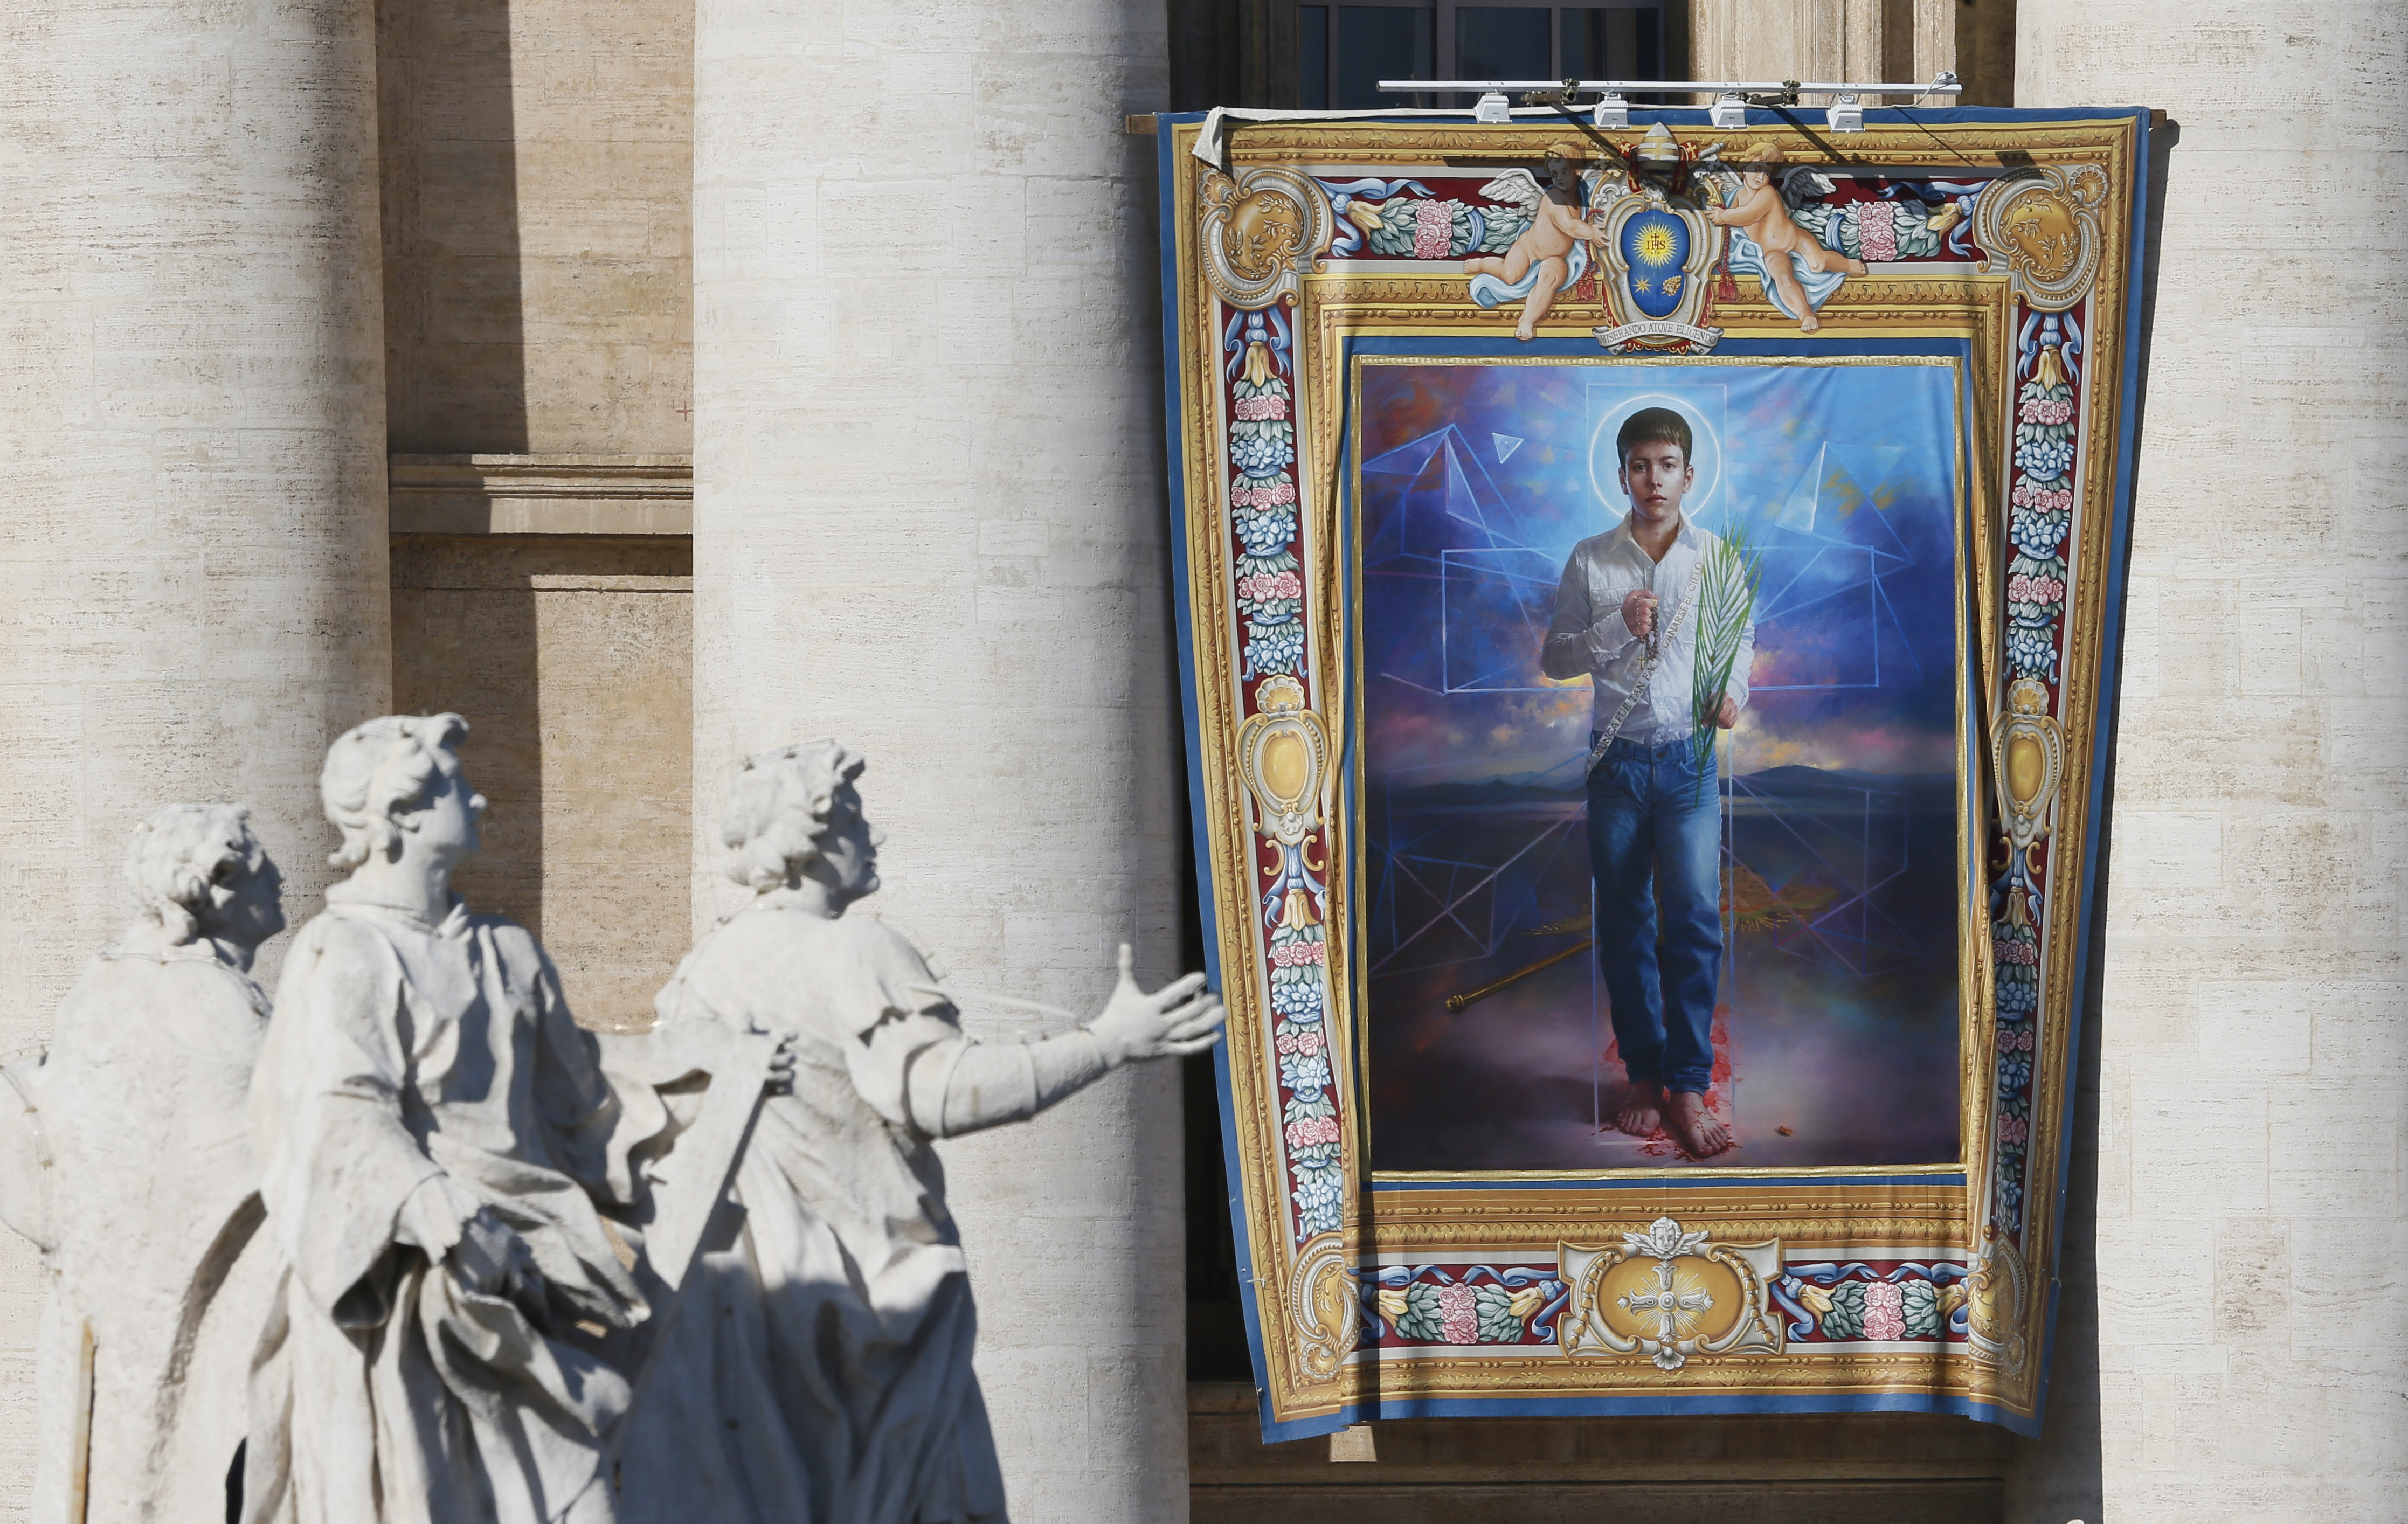 A tapestry of new Mexican St. Jose Sanchez del Rio, who was martyred at the age of 14 in 1928, hangs from the facade of St. Peter's Basilica before the canonization Mass for seven new saints celebrated by Pope Francis at the Vatican Oct. 16. (CNS photo/Paul Haring)